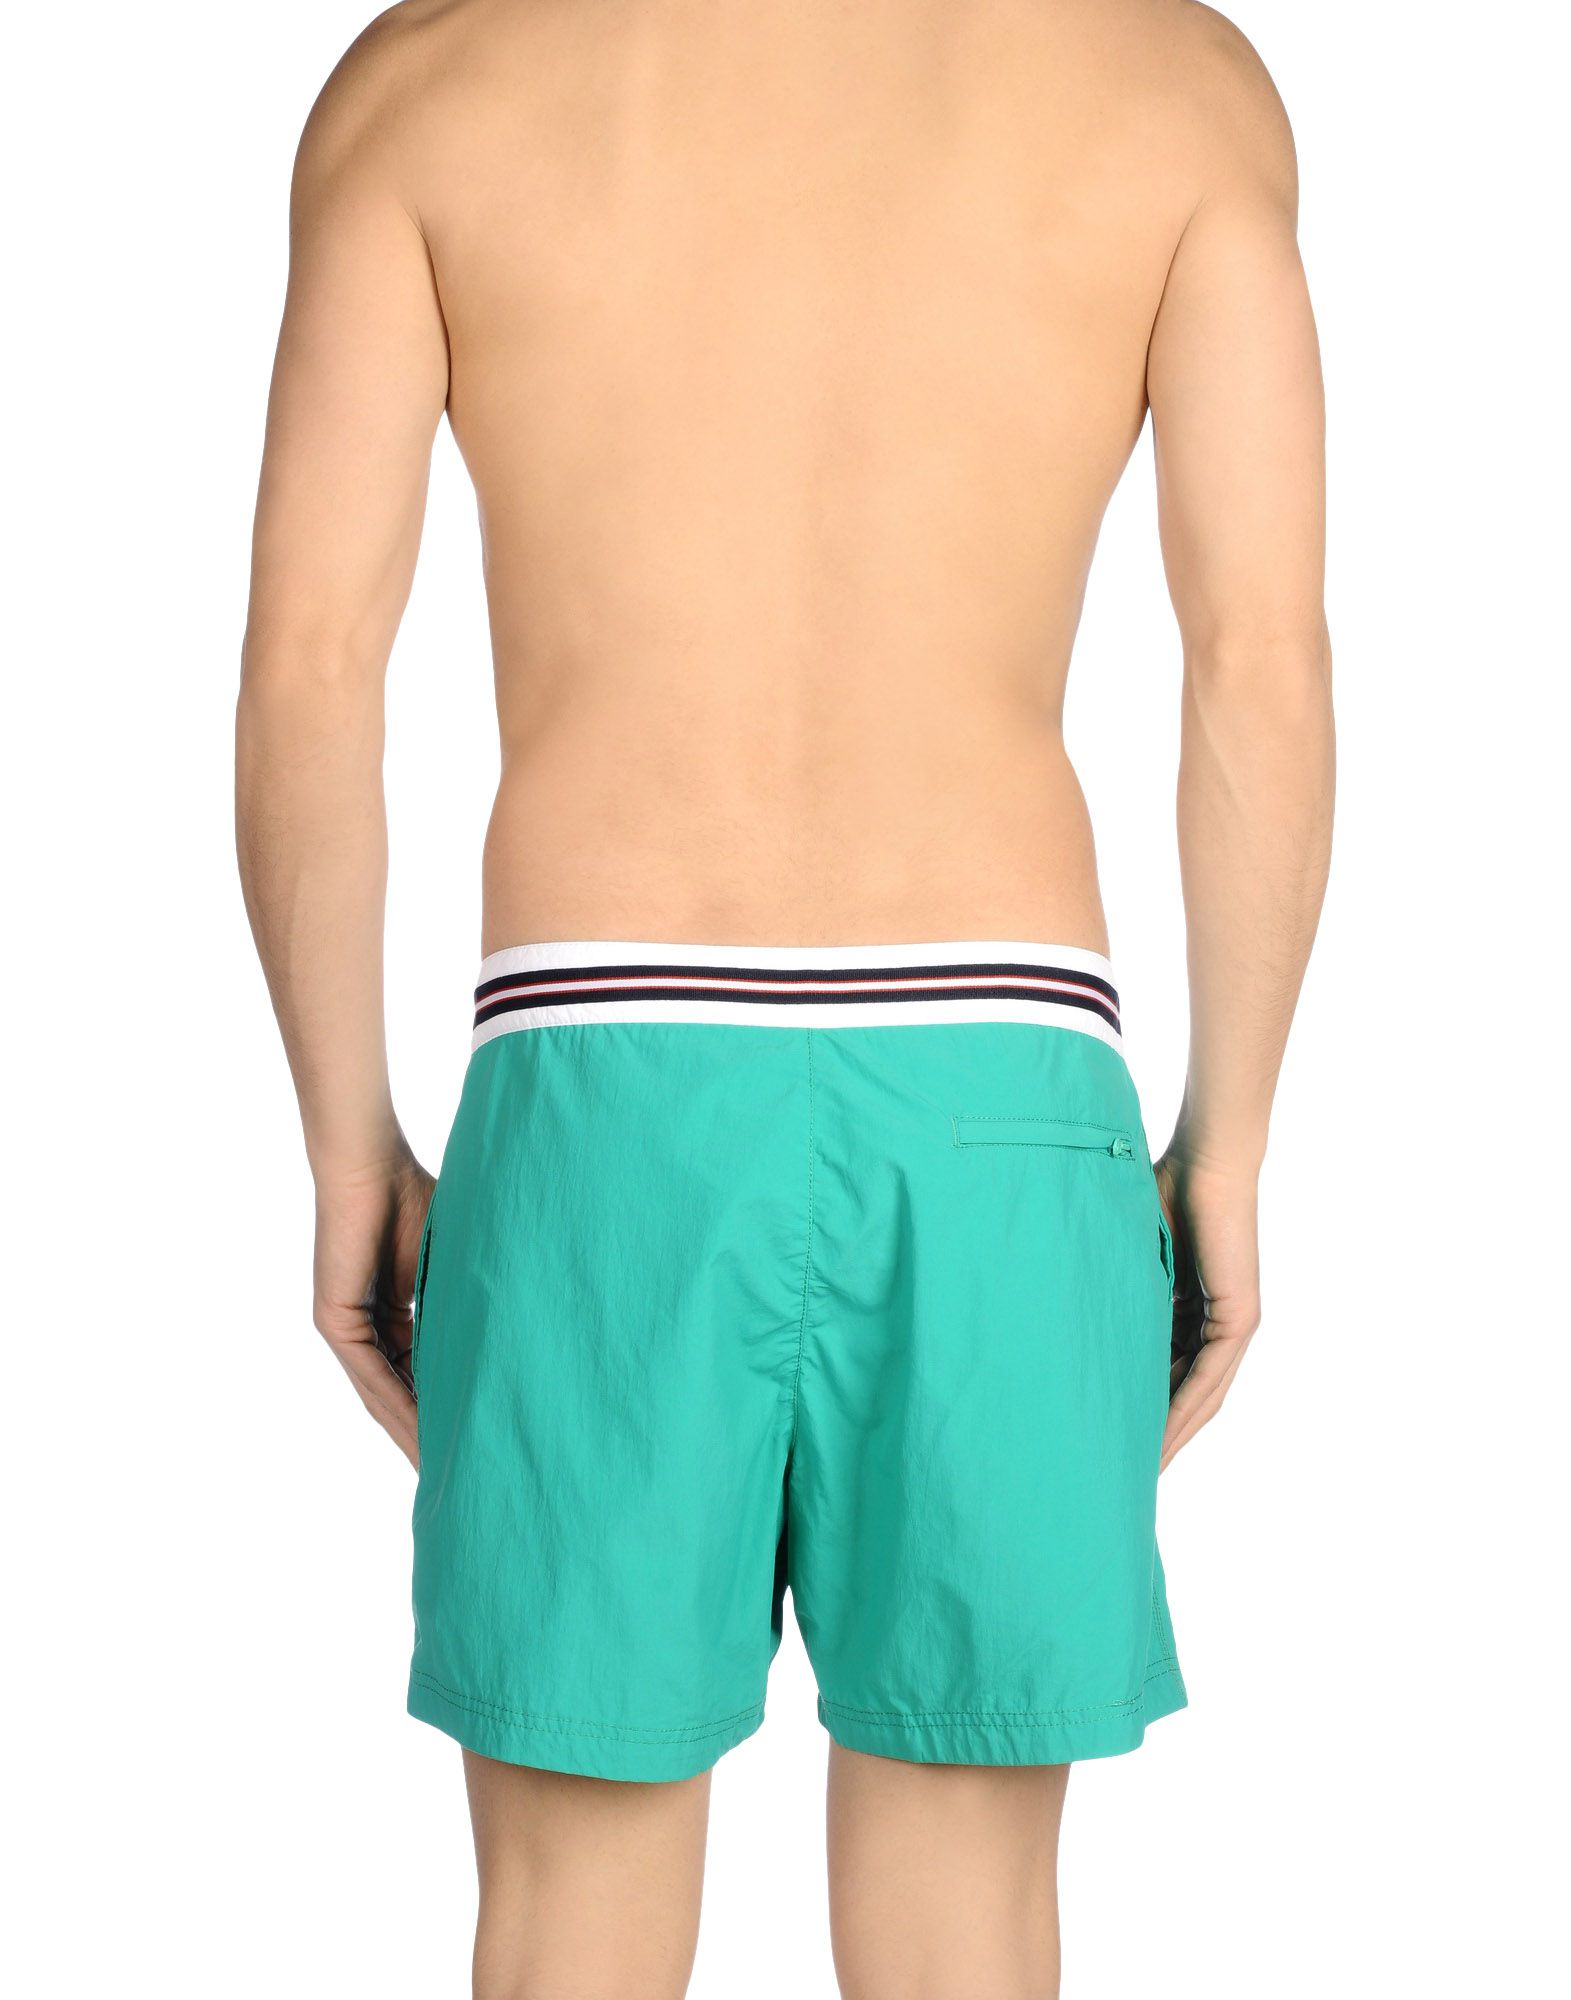 Lyst - Tommy Hilfiger Swimming Trunk in Green for Men